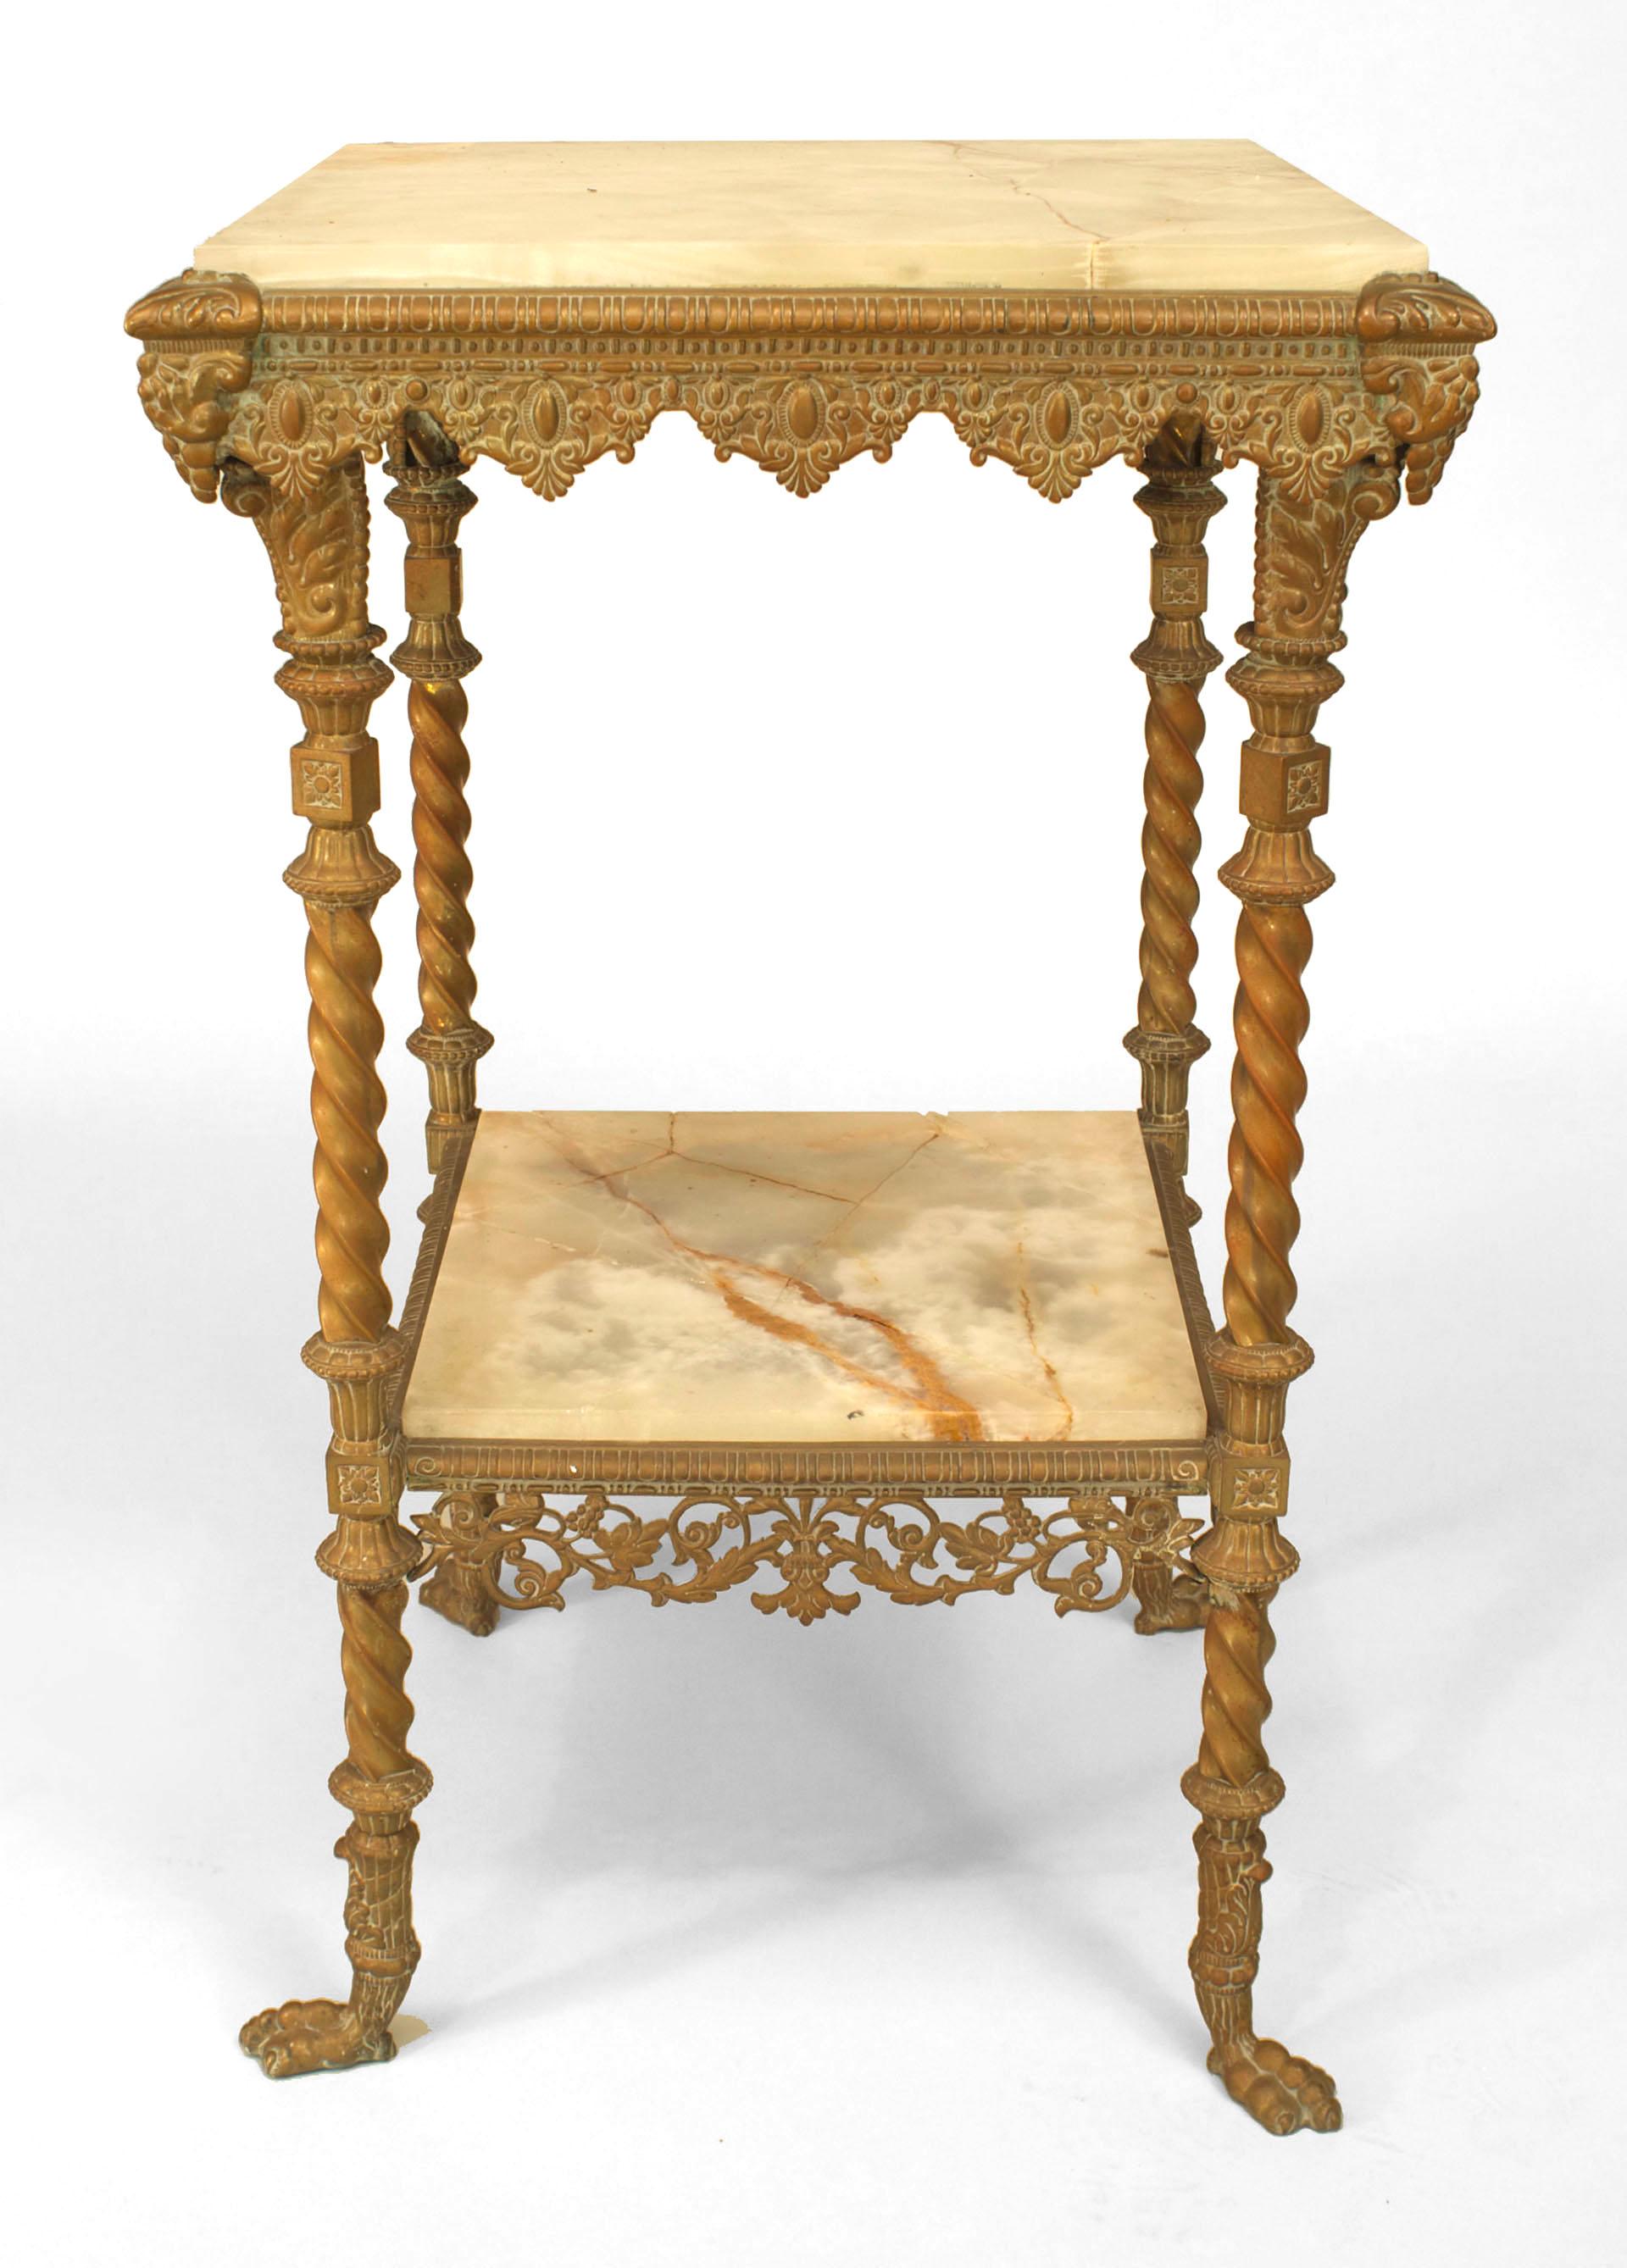 American Victorian brass square end table with onyx top and shelf and claw feet.
